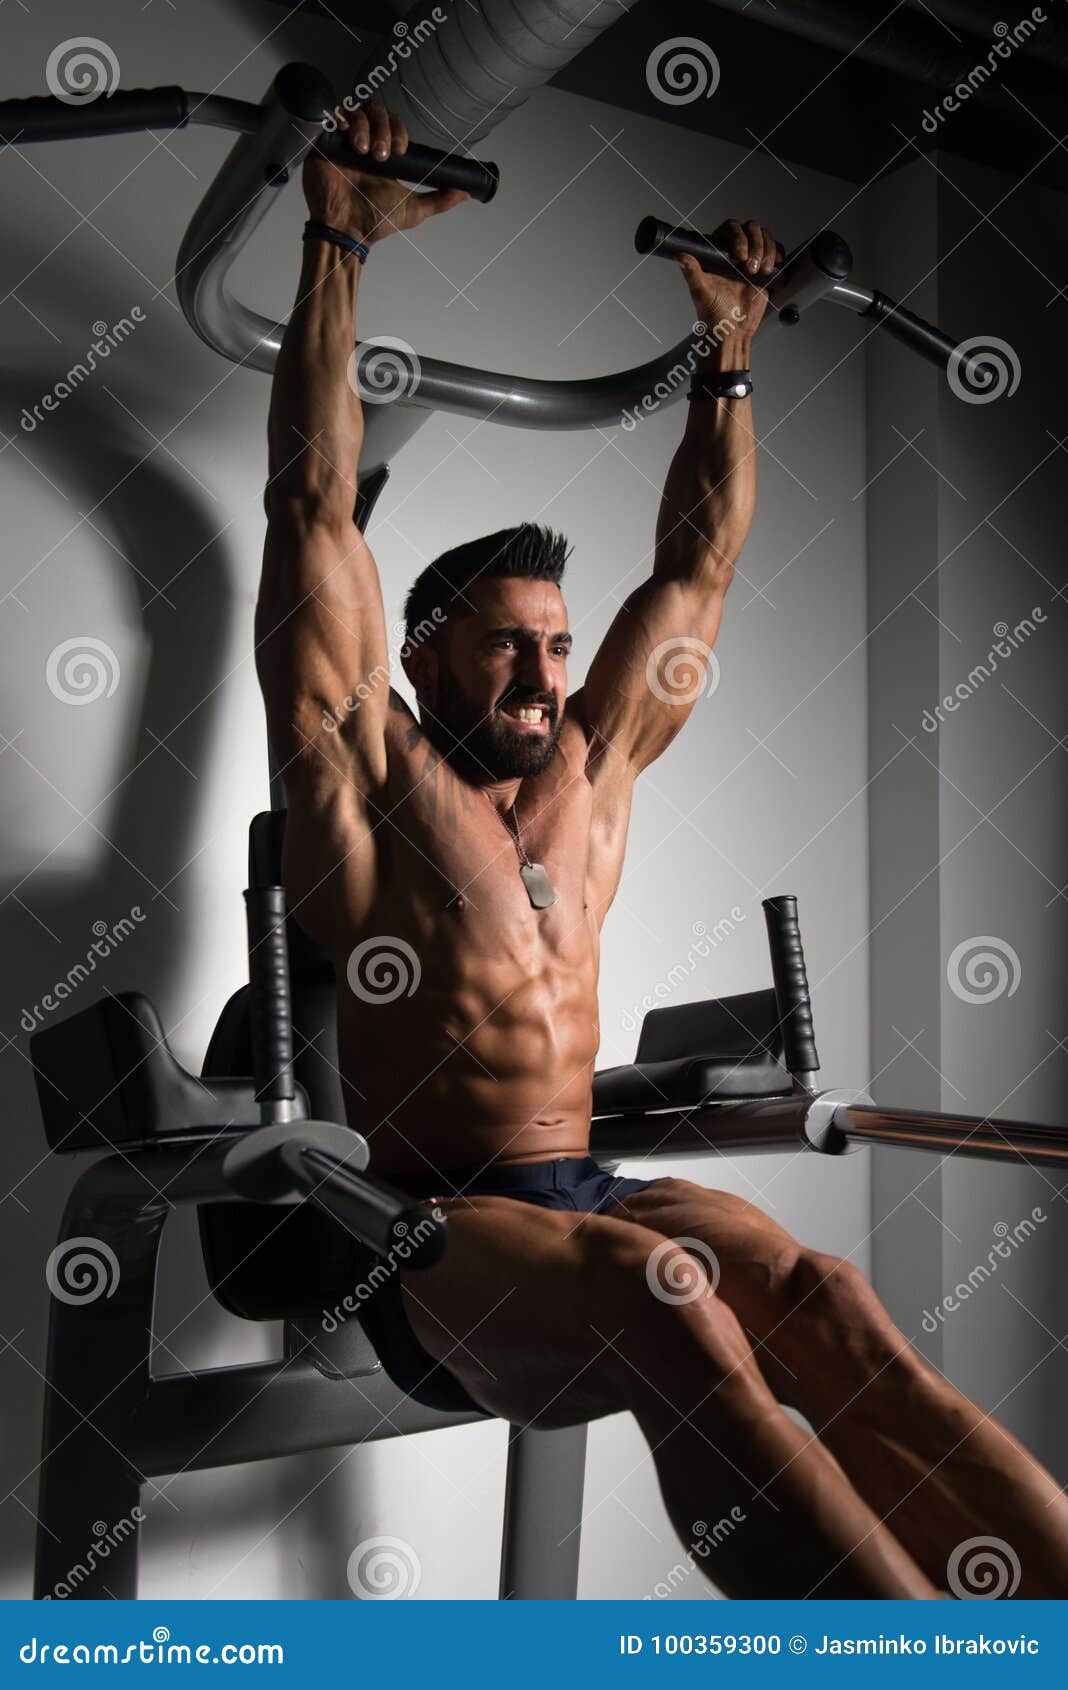 Athlete Doing Pull-up Bar Abdominal Exercise in Gym Stock Photo